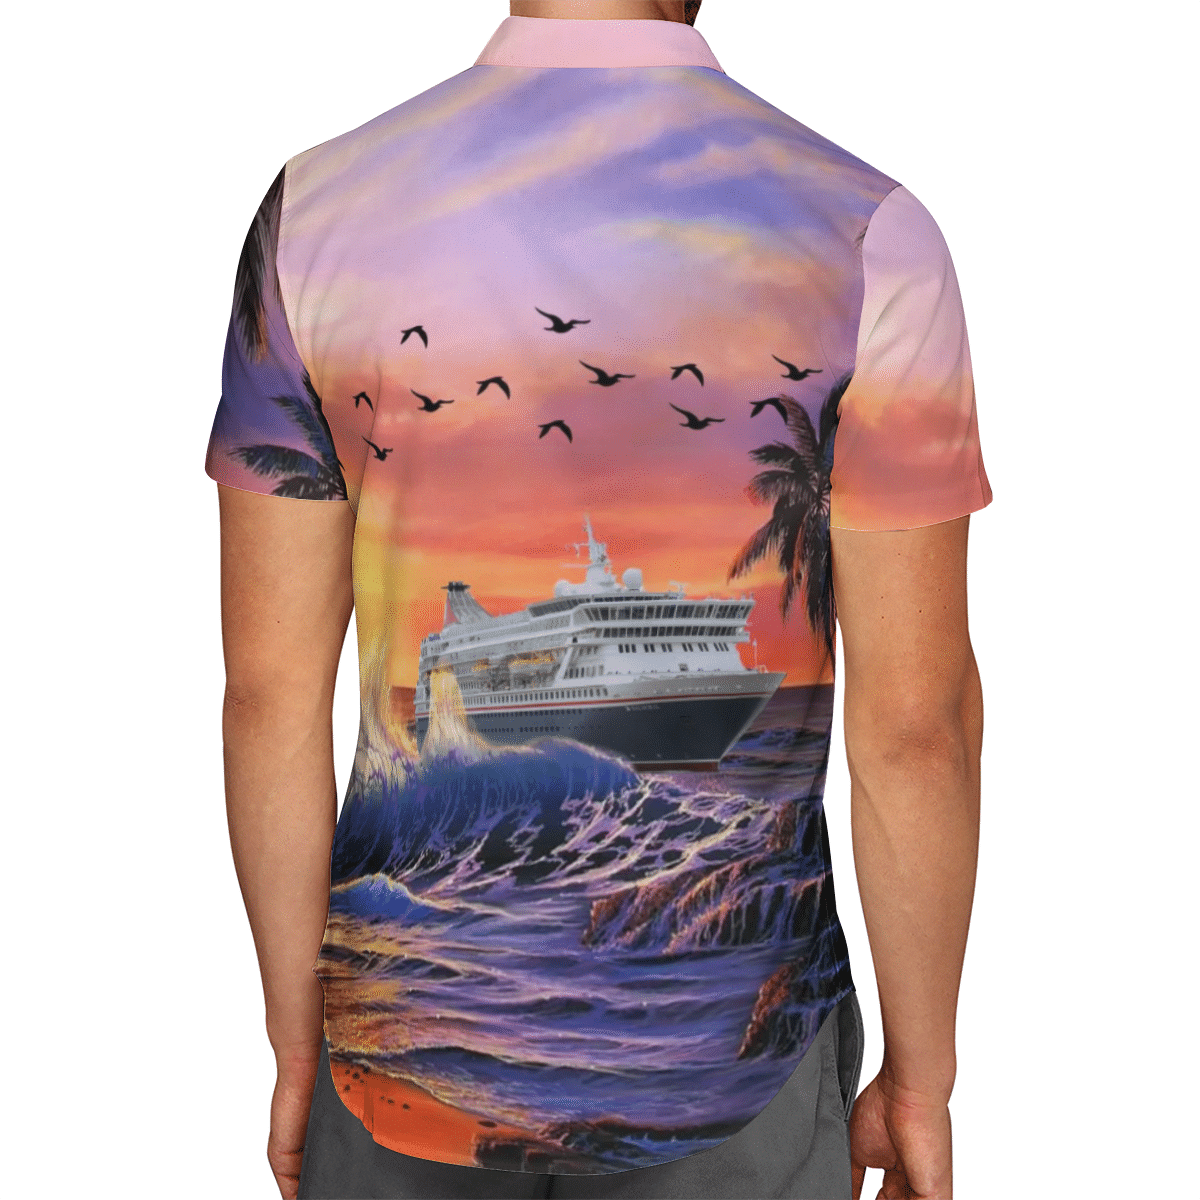 Going to the beach with a quality shirt 147